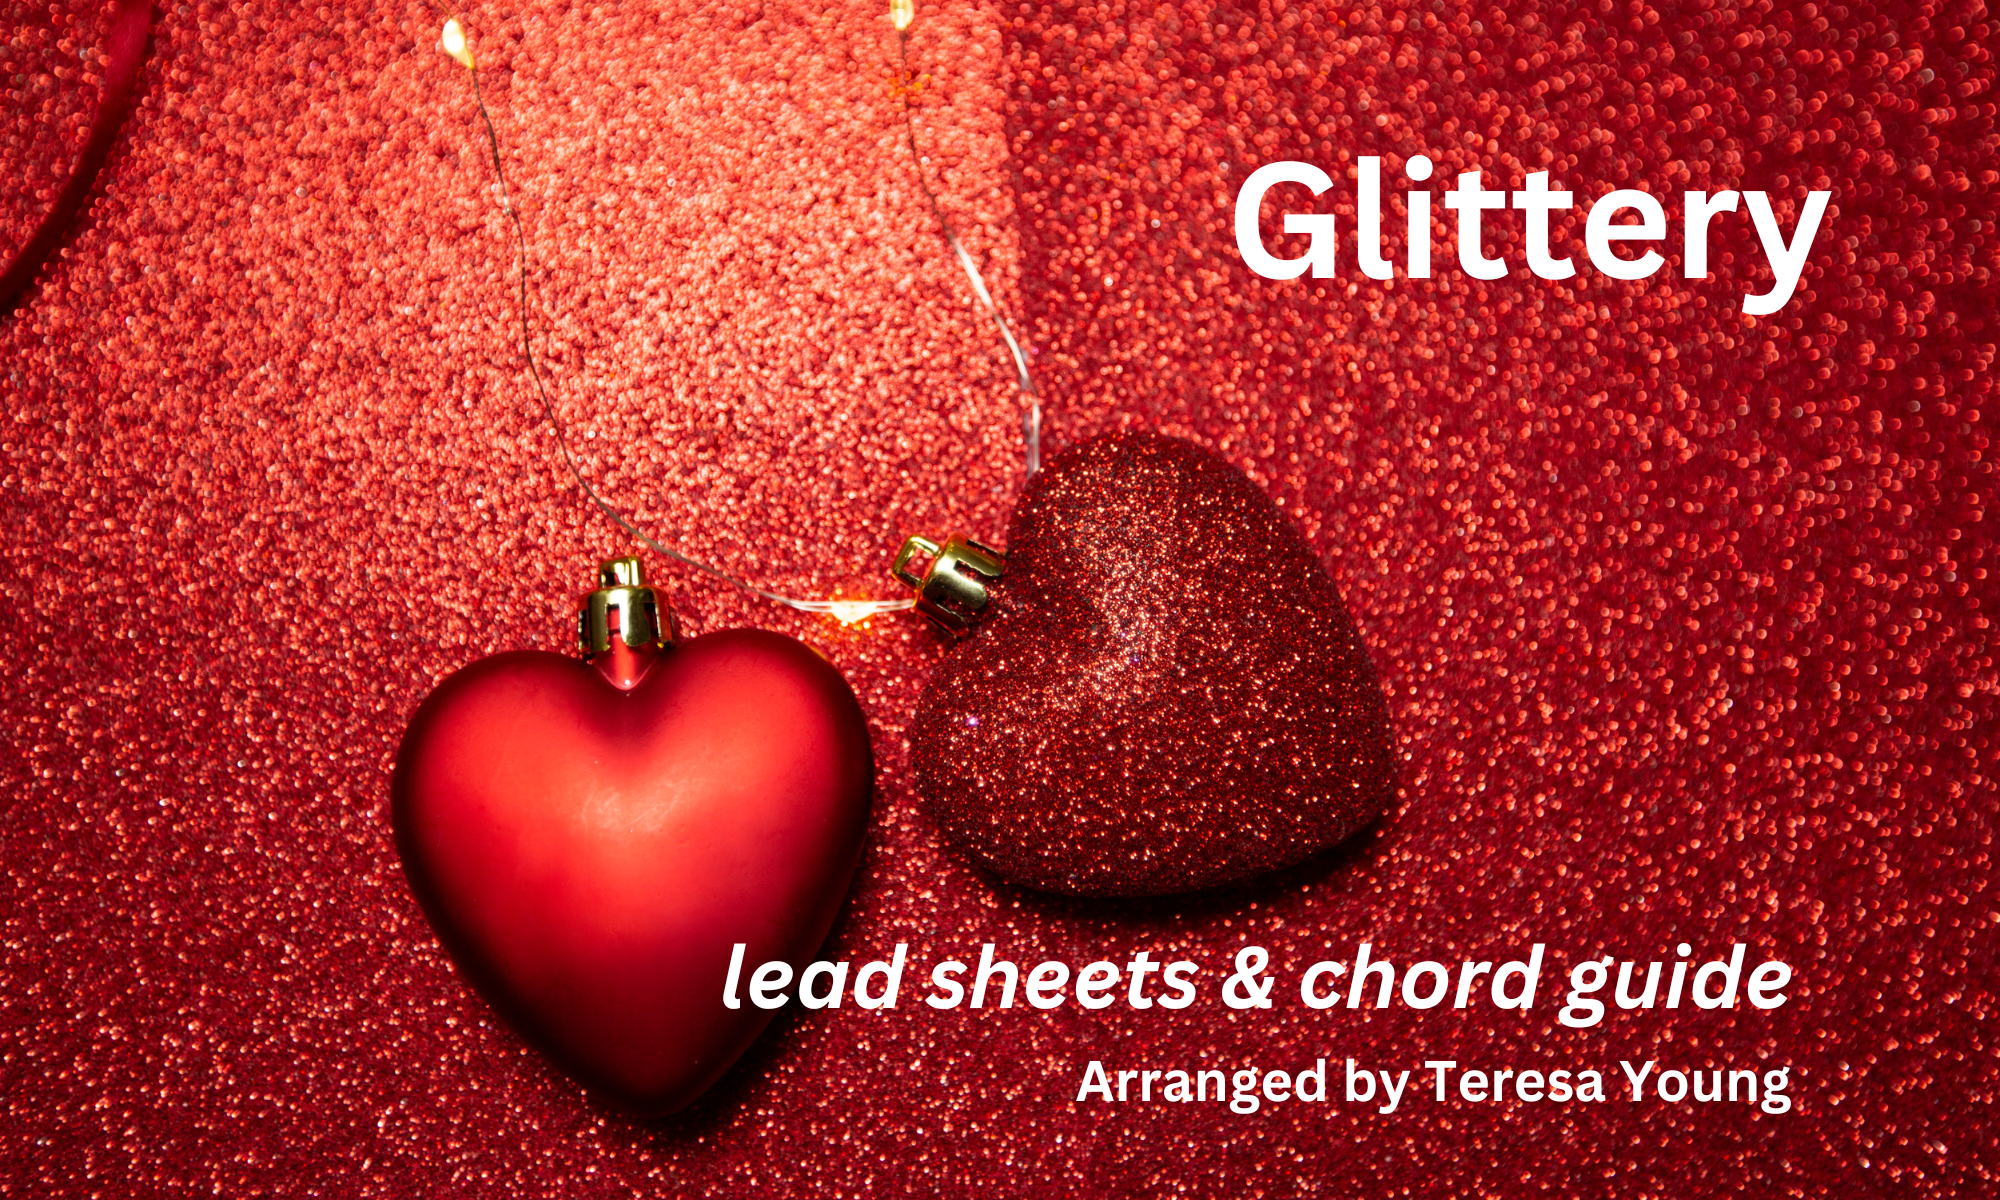 Glittery (lead sheets & chord guide), arr. Teresa Young